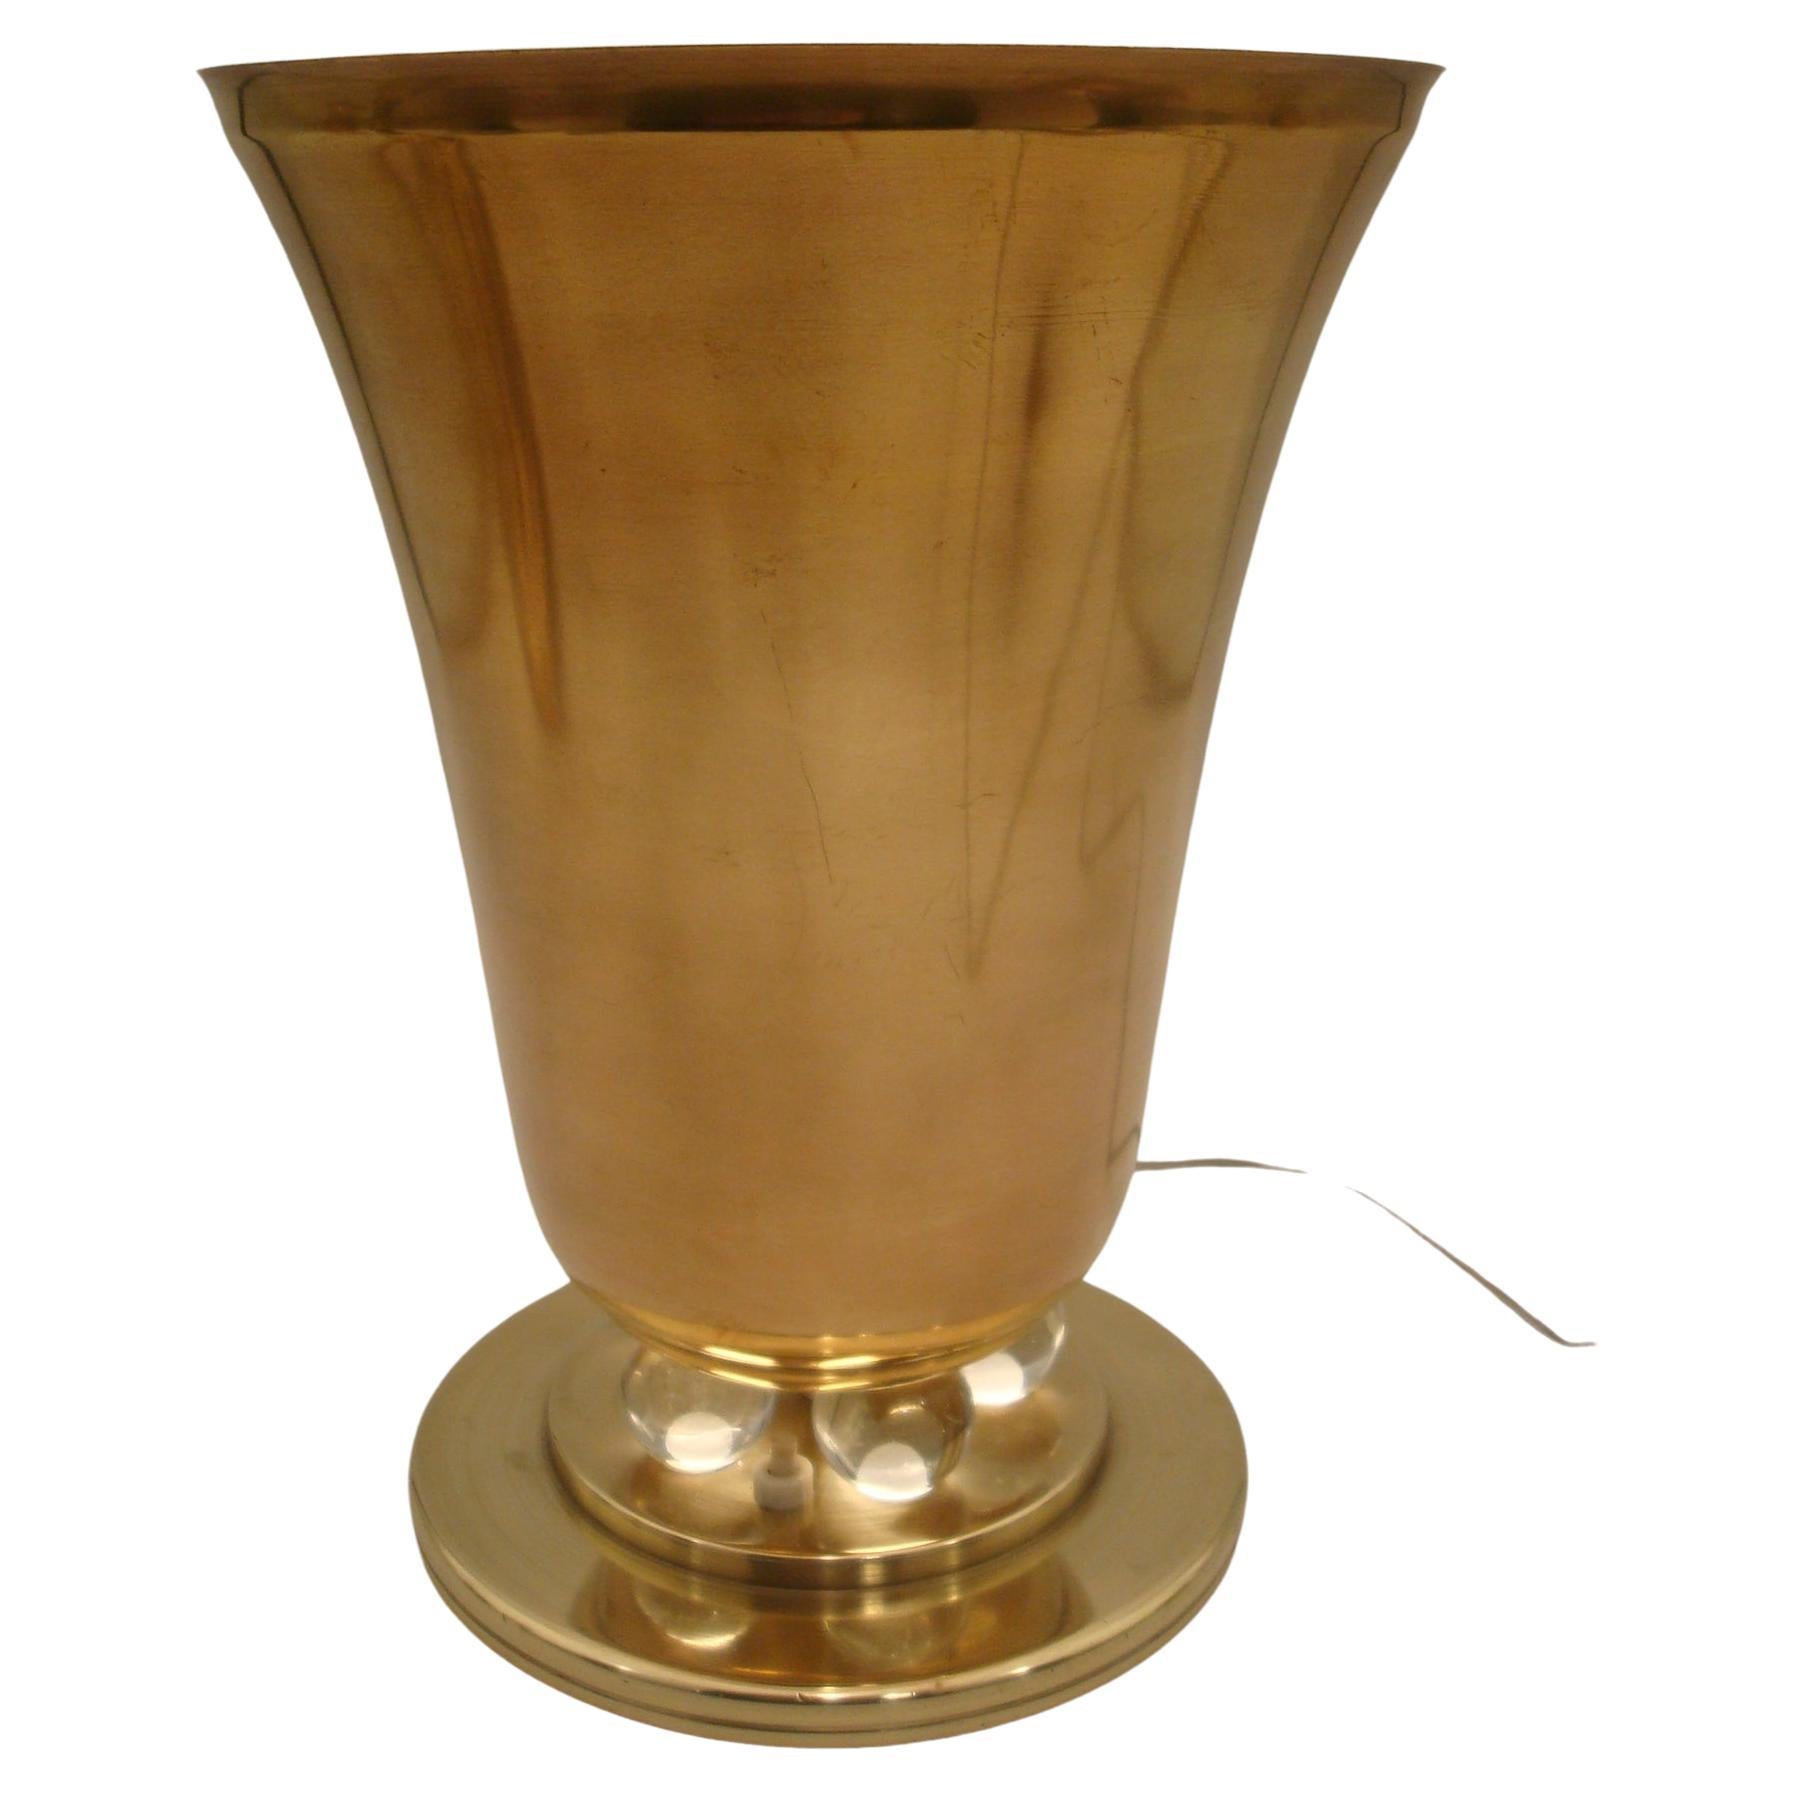 Art Deco Uplight Brass Metal Table Lamp, French, 1930s For Sale